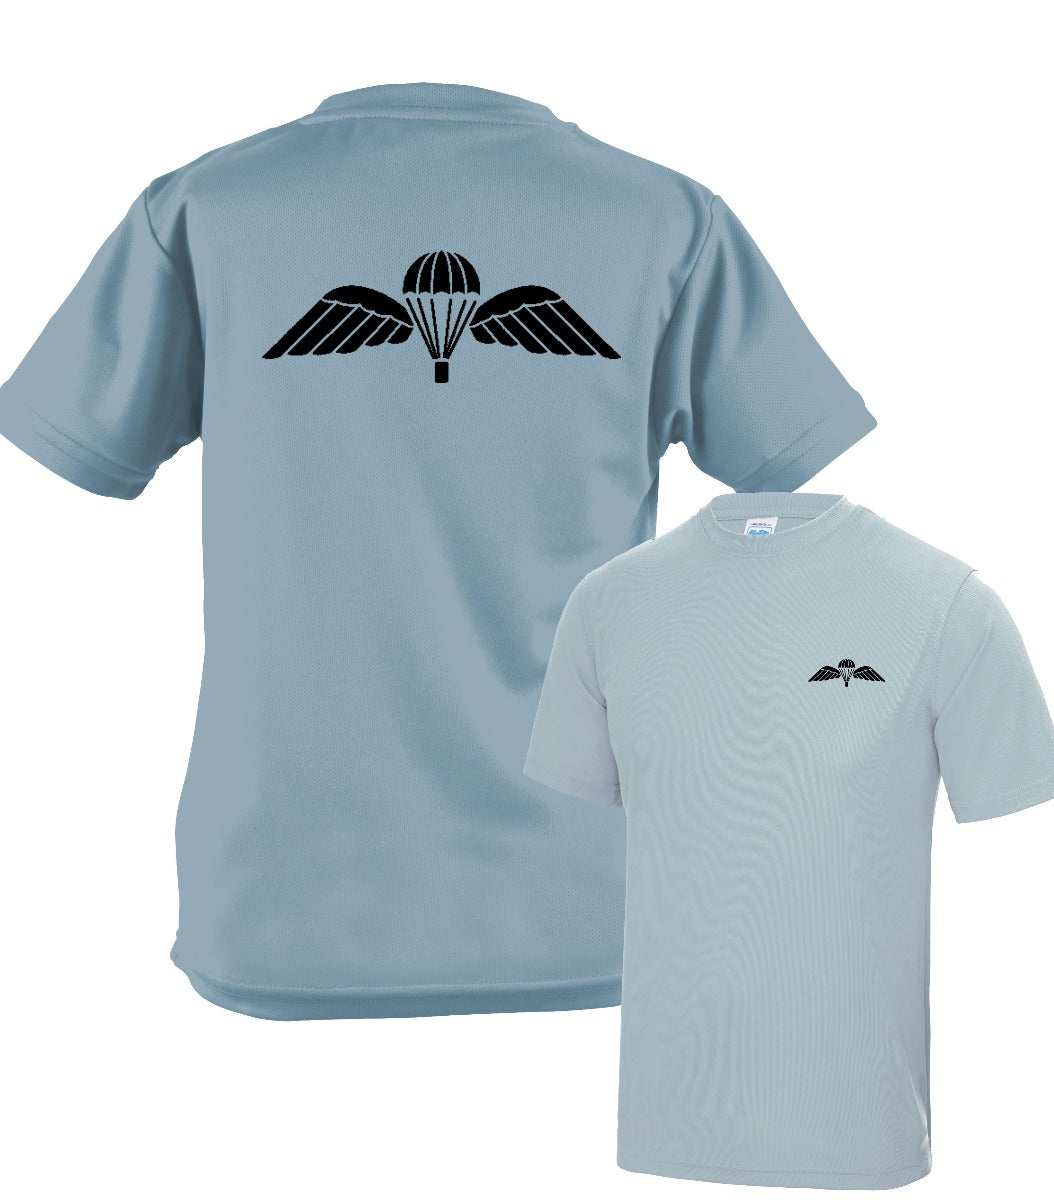 Double Printed Airborne Wings Wicking T-Shirt